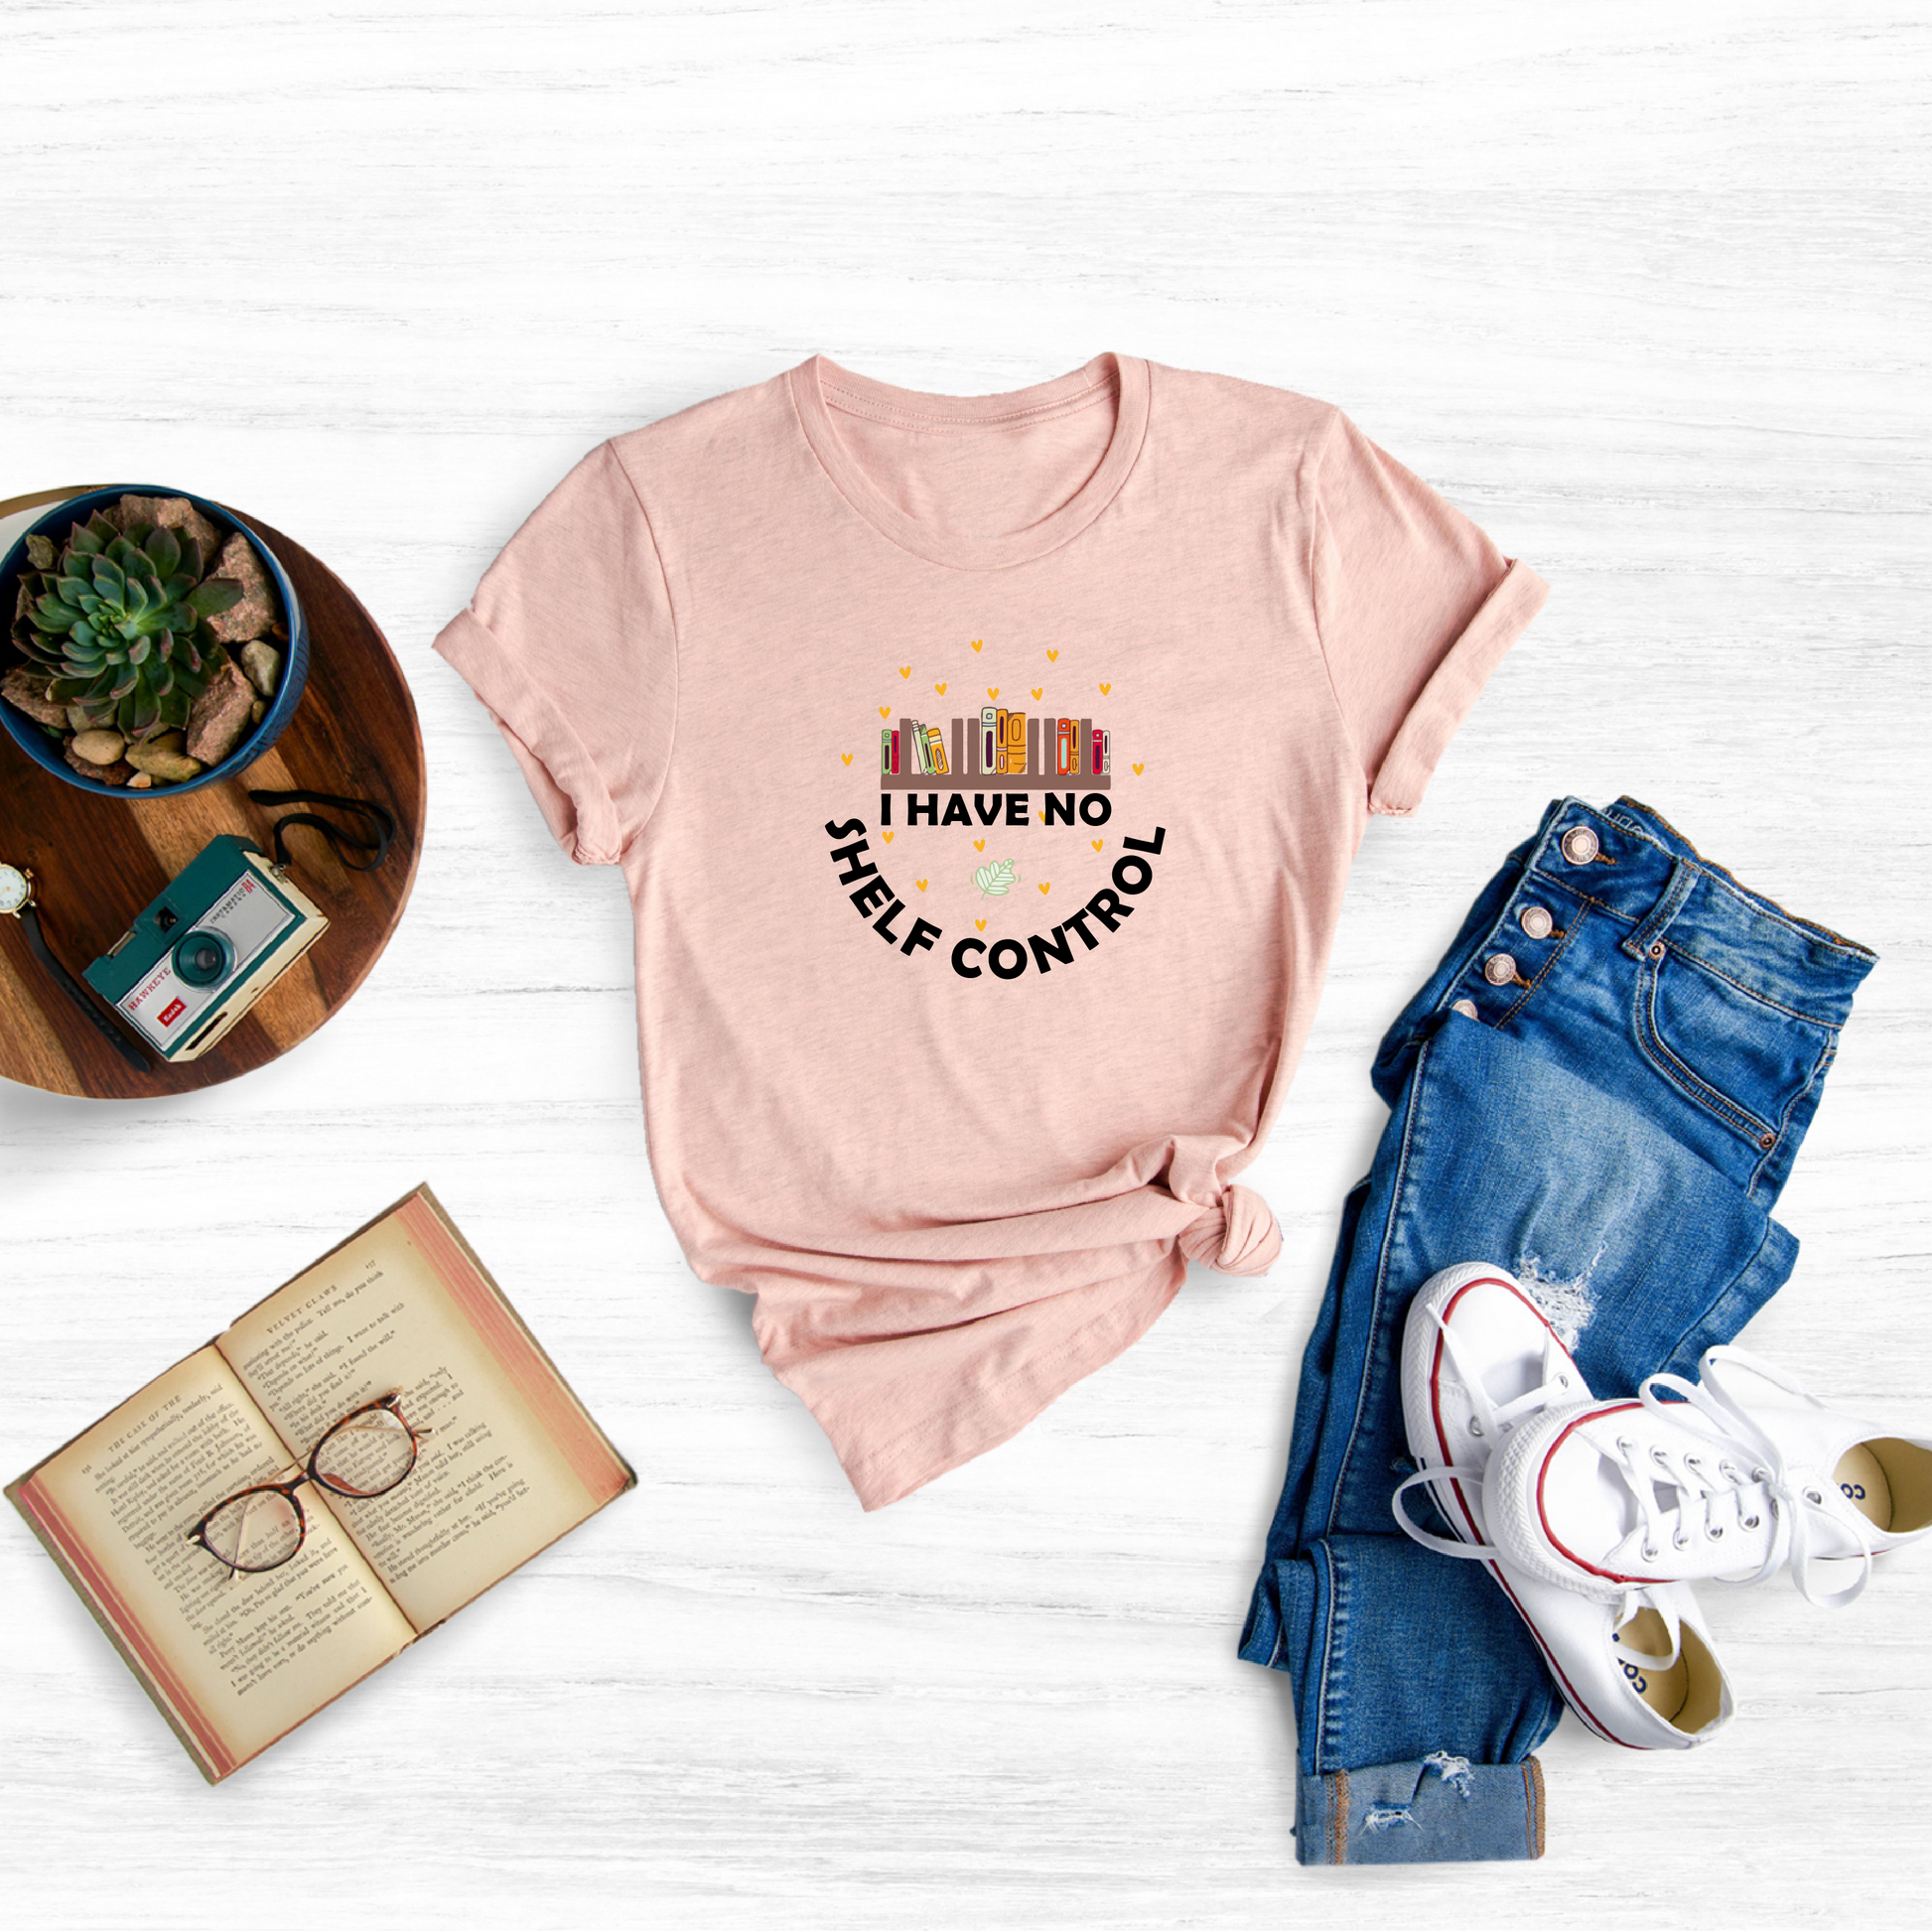 Embrace Your Inner Bookworm with a Hilarious and Heartwarming Reading Shirt